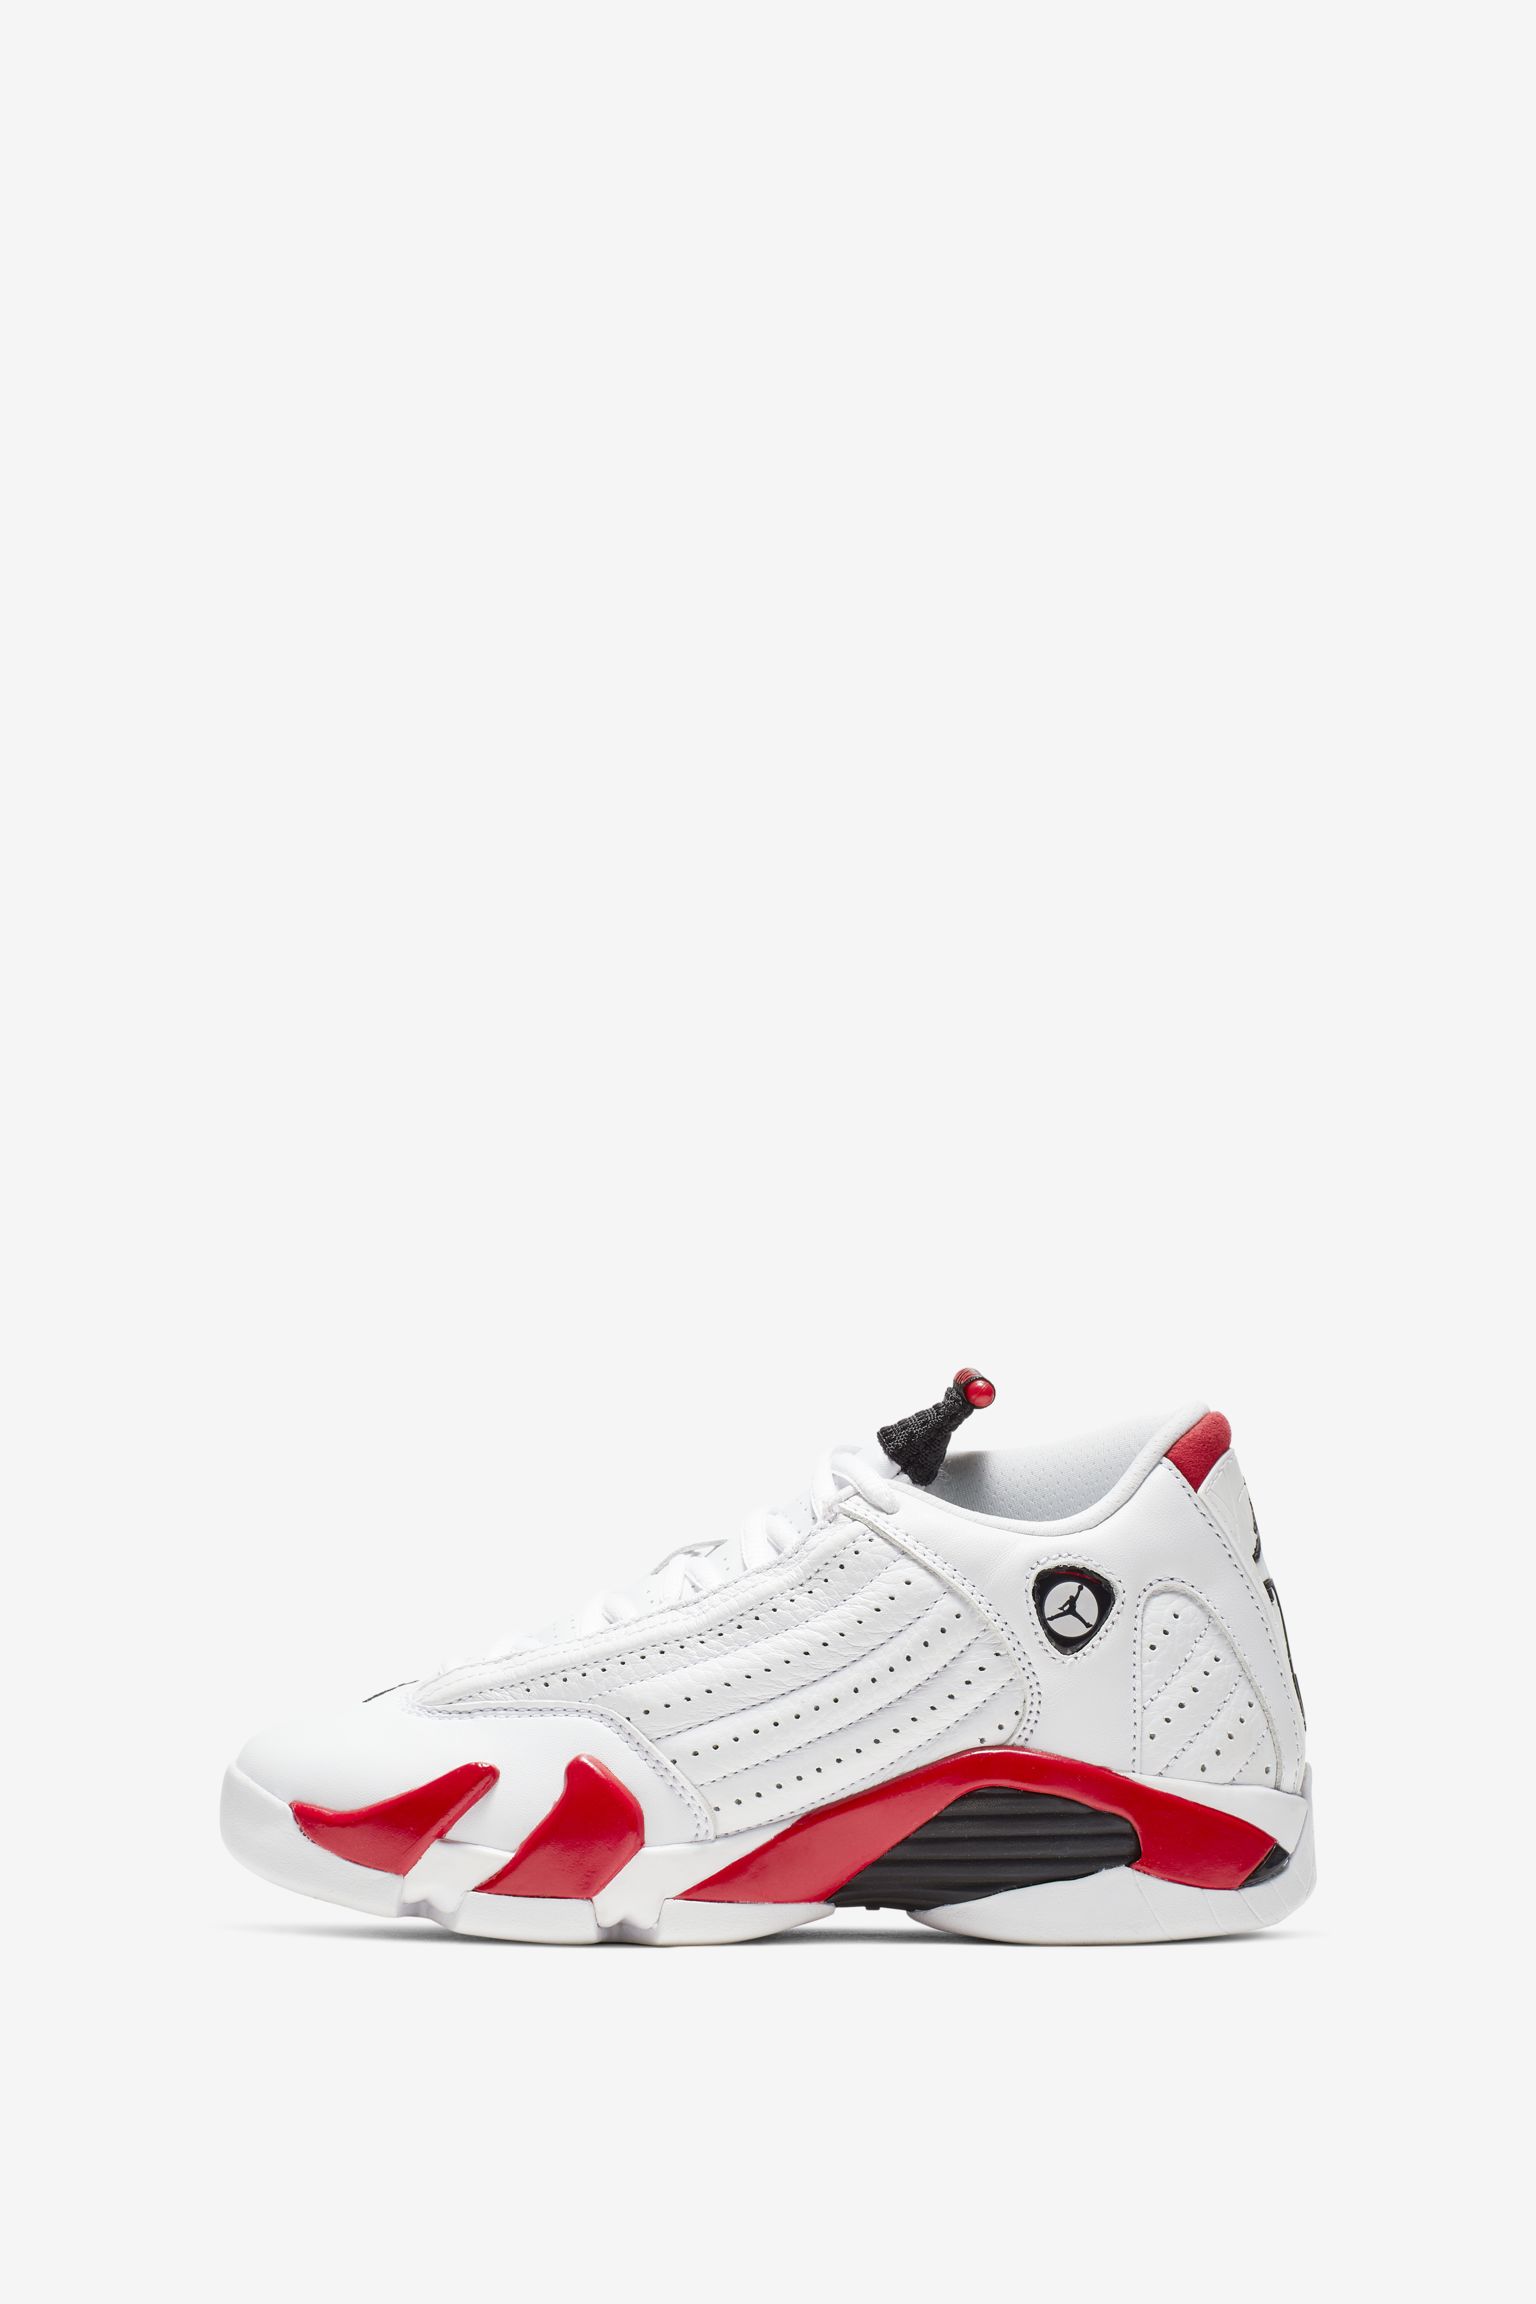 white red 14s